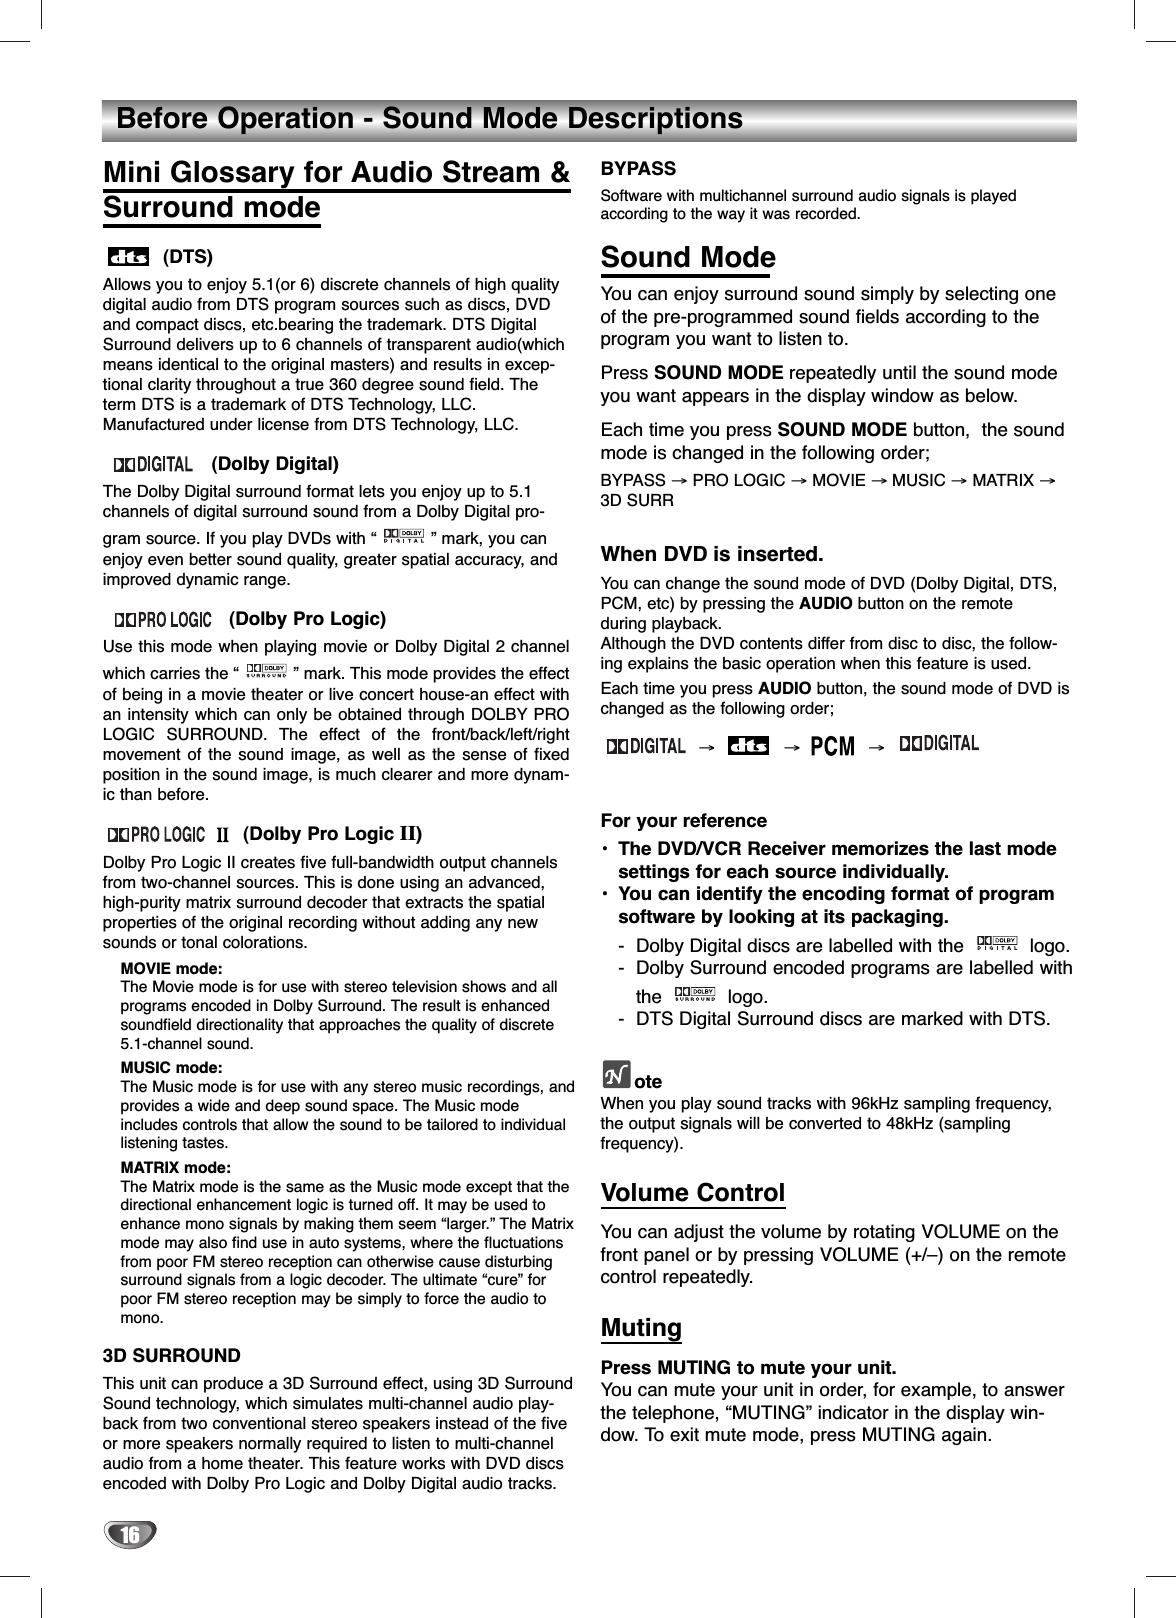 16Before Operation - Sound Mode DescriptionsMini Glossary for Audio Stream &amp; Surround mode(DTS)Allows you to enjoy 5.1(or 6) discrete channels of high qualitydigital audio from DTS program sources such as discs, DVDand compact discs, etc.bearing the trademark. DTS DigitalSurround delivers up to 6 channels of transparent audio(whichmeans identical to the original masters) and results in excep-tional clarity throughout a true 360 degree sound field. Theterm DTS is a trademark of DTS Technology, LLC.Manufactured under license from DTS Technology, LLC.(Dolby Digital)The Dolby Digital surround format lets you enjoy up to 5.1channels of digital surround sound from a Dolby Digital pro-gram source. If you play DVDs with “ ” mark, you canenjoy even better sound quality, greater spatial accuracy, andimproved dynamic range. (Dolby Pro Logic)Use this mode when playing movie or Dolby Digital 2 channelwhich carries the “ ” mark. This mode provides the effectof being in a movie theater or live concert house-an effect withan intensity which can only be obtained through DOLBY PROLOGIC SURROUND. The effect of the front/back/left/rightmovement of the sound image, as well as the sense of fixedposition in the sound image, is much clearer and more dynam-ic than before.(Dolby Pro Logic II)Dolby Pro Logic II creates five full-bandwidth output channelsfrom two-channel sources. This is done using an advanced,high-purity matrix surround decoder that extracts the spatialproperties of the original recording without adding any newsounds or tonal colorations.MOVIE mode:The Movie mode is for use with stereo television shows and allprograms encoded in Dolby Surround. The result is enhancedsoundfield directionality that approaches the quality of discrete5.1-channel sound.MUSIC mode:The Music mode is for use with any stereo music recordings, andprovides a wide and deep sound space. The Music modeincludes controls that allow the sound to be tailored to individuallistening tastes.MATRIX mode:The Matrix mode is the same as the Music mode except that thedirectional enhancement logic is turned off. It may be used toenhance mono signals by making them seem “larger.” The Matrixmode may also find use in auto systems, where the fluctuationsfrom poor FM stereo reception can otherwise cause disturbingsurround signals from a logic decoder. The ultimate “cure” forpoor FM stereo reception may be simply to force the audio tomono.3D SURROUNDThis unit can produce a 3D Surround effect, using 3D SurroundSound technology, which simulates multi-channel audio play-back from two conventional stereo speakers instead of the fiveor more speakers normally required to listen to multi-channelaudio from a home theater. This feature works with DVD discsencoded with Dolby Pro Logic and Dolby Digital audio tracks.BYPASSSoftware with multichannel surround audio signals is playedaccording to the way it was recorded. Sound ModeYou can enjoy surround sound simply by selecting oneof the pre-programmed sound fields according to theprogram you want to listen to.Press SOUND MODE repeatedly until the sound modeyou want appears in the display window as below.Each time you press SOUND MODE button,  the soundmode is changed in the following order; BYPASS →PRO LOGIC →MOVIE → MUSIC →MATRIX →3D SURR When DVD is inserted.You can change the sound mode of DVD (Dolby Digital, DTS,PCM, etc) by pressing the AUDIO button on the remote during playback.Although the DVD contents differ from disc to disc, the follow-ing explains the basic operation when this feature is used.Each time you press AUDIO button, the sound mode of DVD ischanged as the following order; →→→For your reference•The DVD/VCR Receiver memorizes the last modesettings for each source individually.•You can identify the encoding format of program software by looking at its packaging.-Dolby Digital discs are labelled with the  logo.-Dolby Surround encoded programs are labelled withthe logo.-DTS Digital Surround discs are marked with DTS.oteWhen you play sound tracks with 96kHz sampling frequency,the output signals will be converted to 48kHz (sampling frequency).Volume ControlYou can adjust the volume by rotating VOLUME on thefront panel or by pressing VOLUME (+/–) on the remotecontrol repeatedly.MutingPress MUTING to mute your unit. You can mute your unit in order, for example, to answerthe telephone, “MUTING” indicator in the display win-dow. To exit mute mode, press MUTING again.